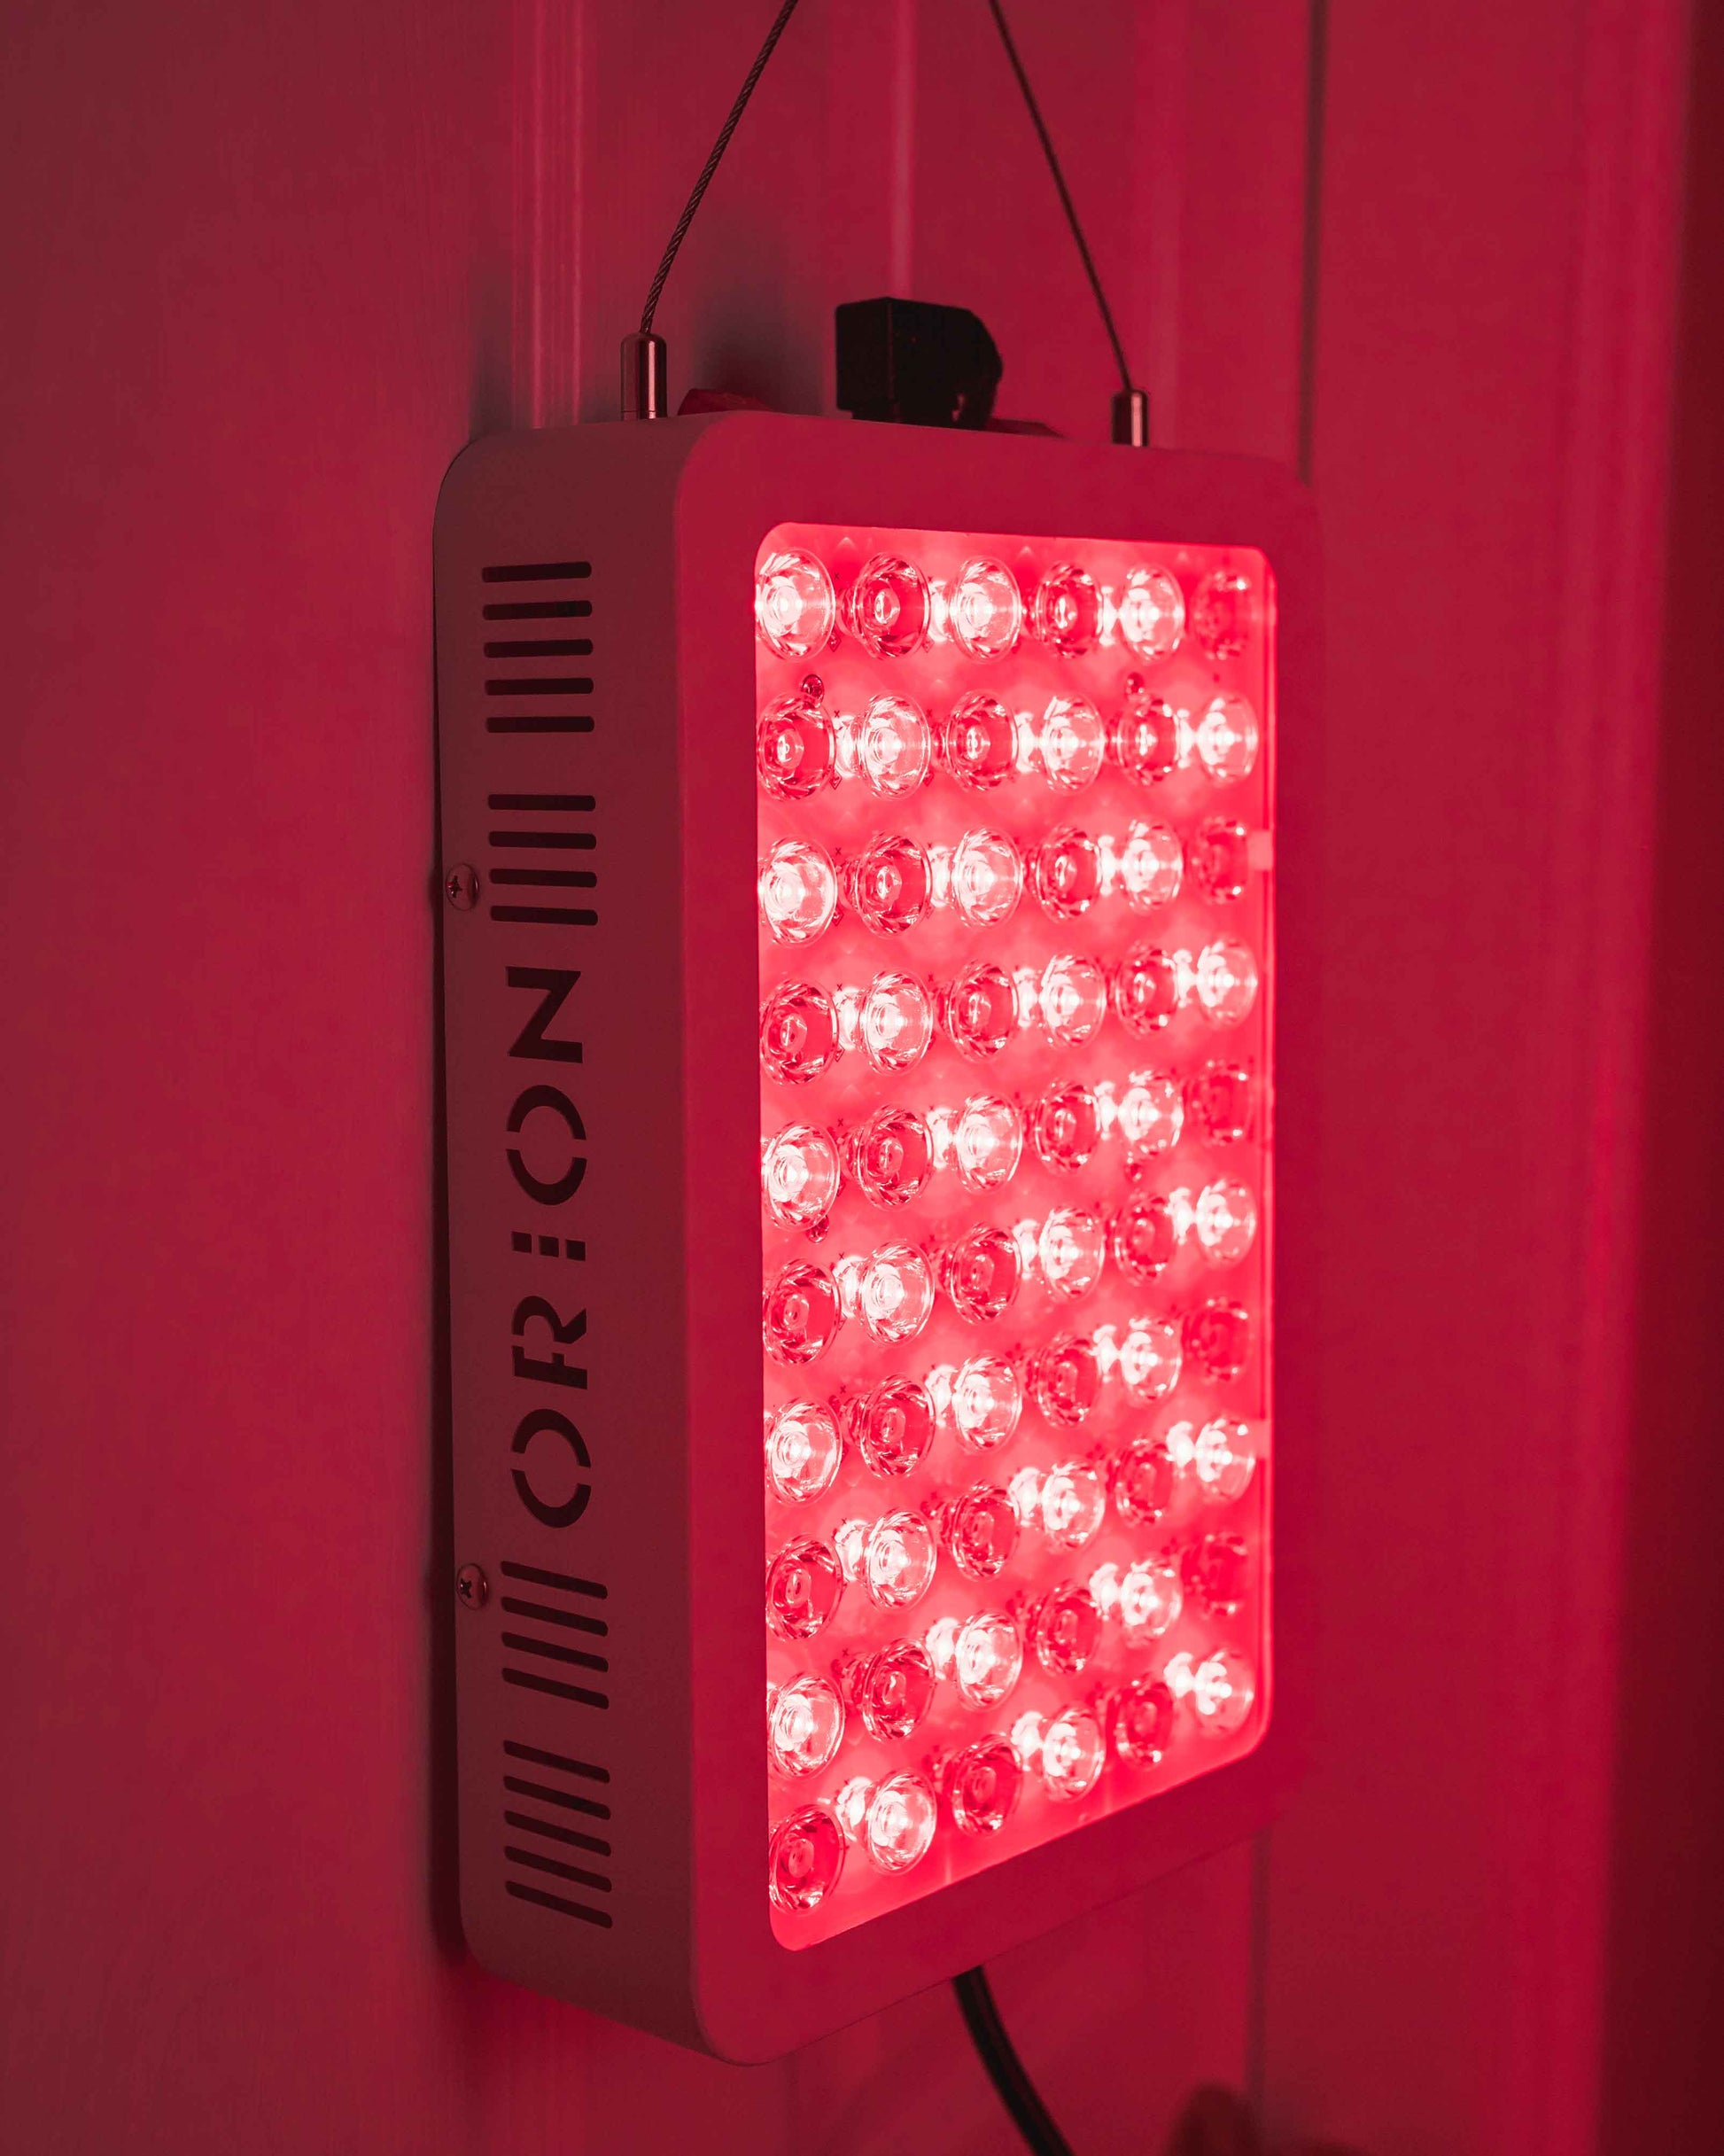 Orion 300 with the red and near-infrared lights turned on and hung up on the door. Orion Red Light Therapy. 